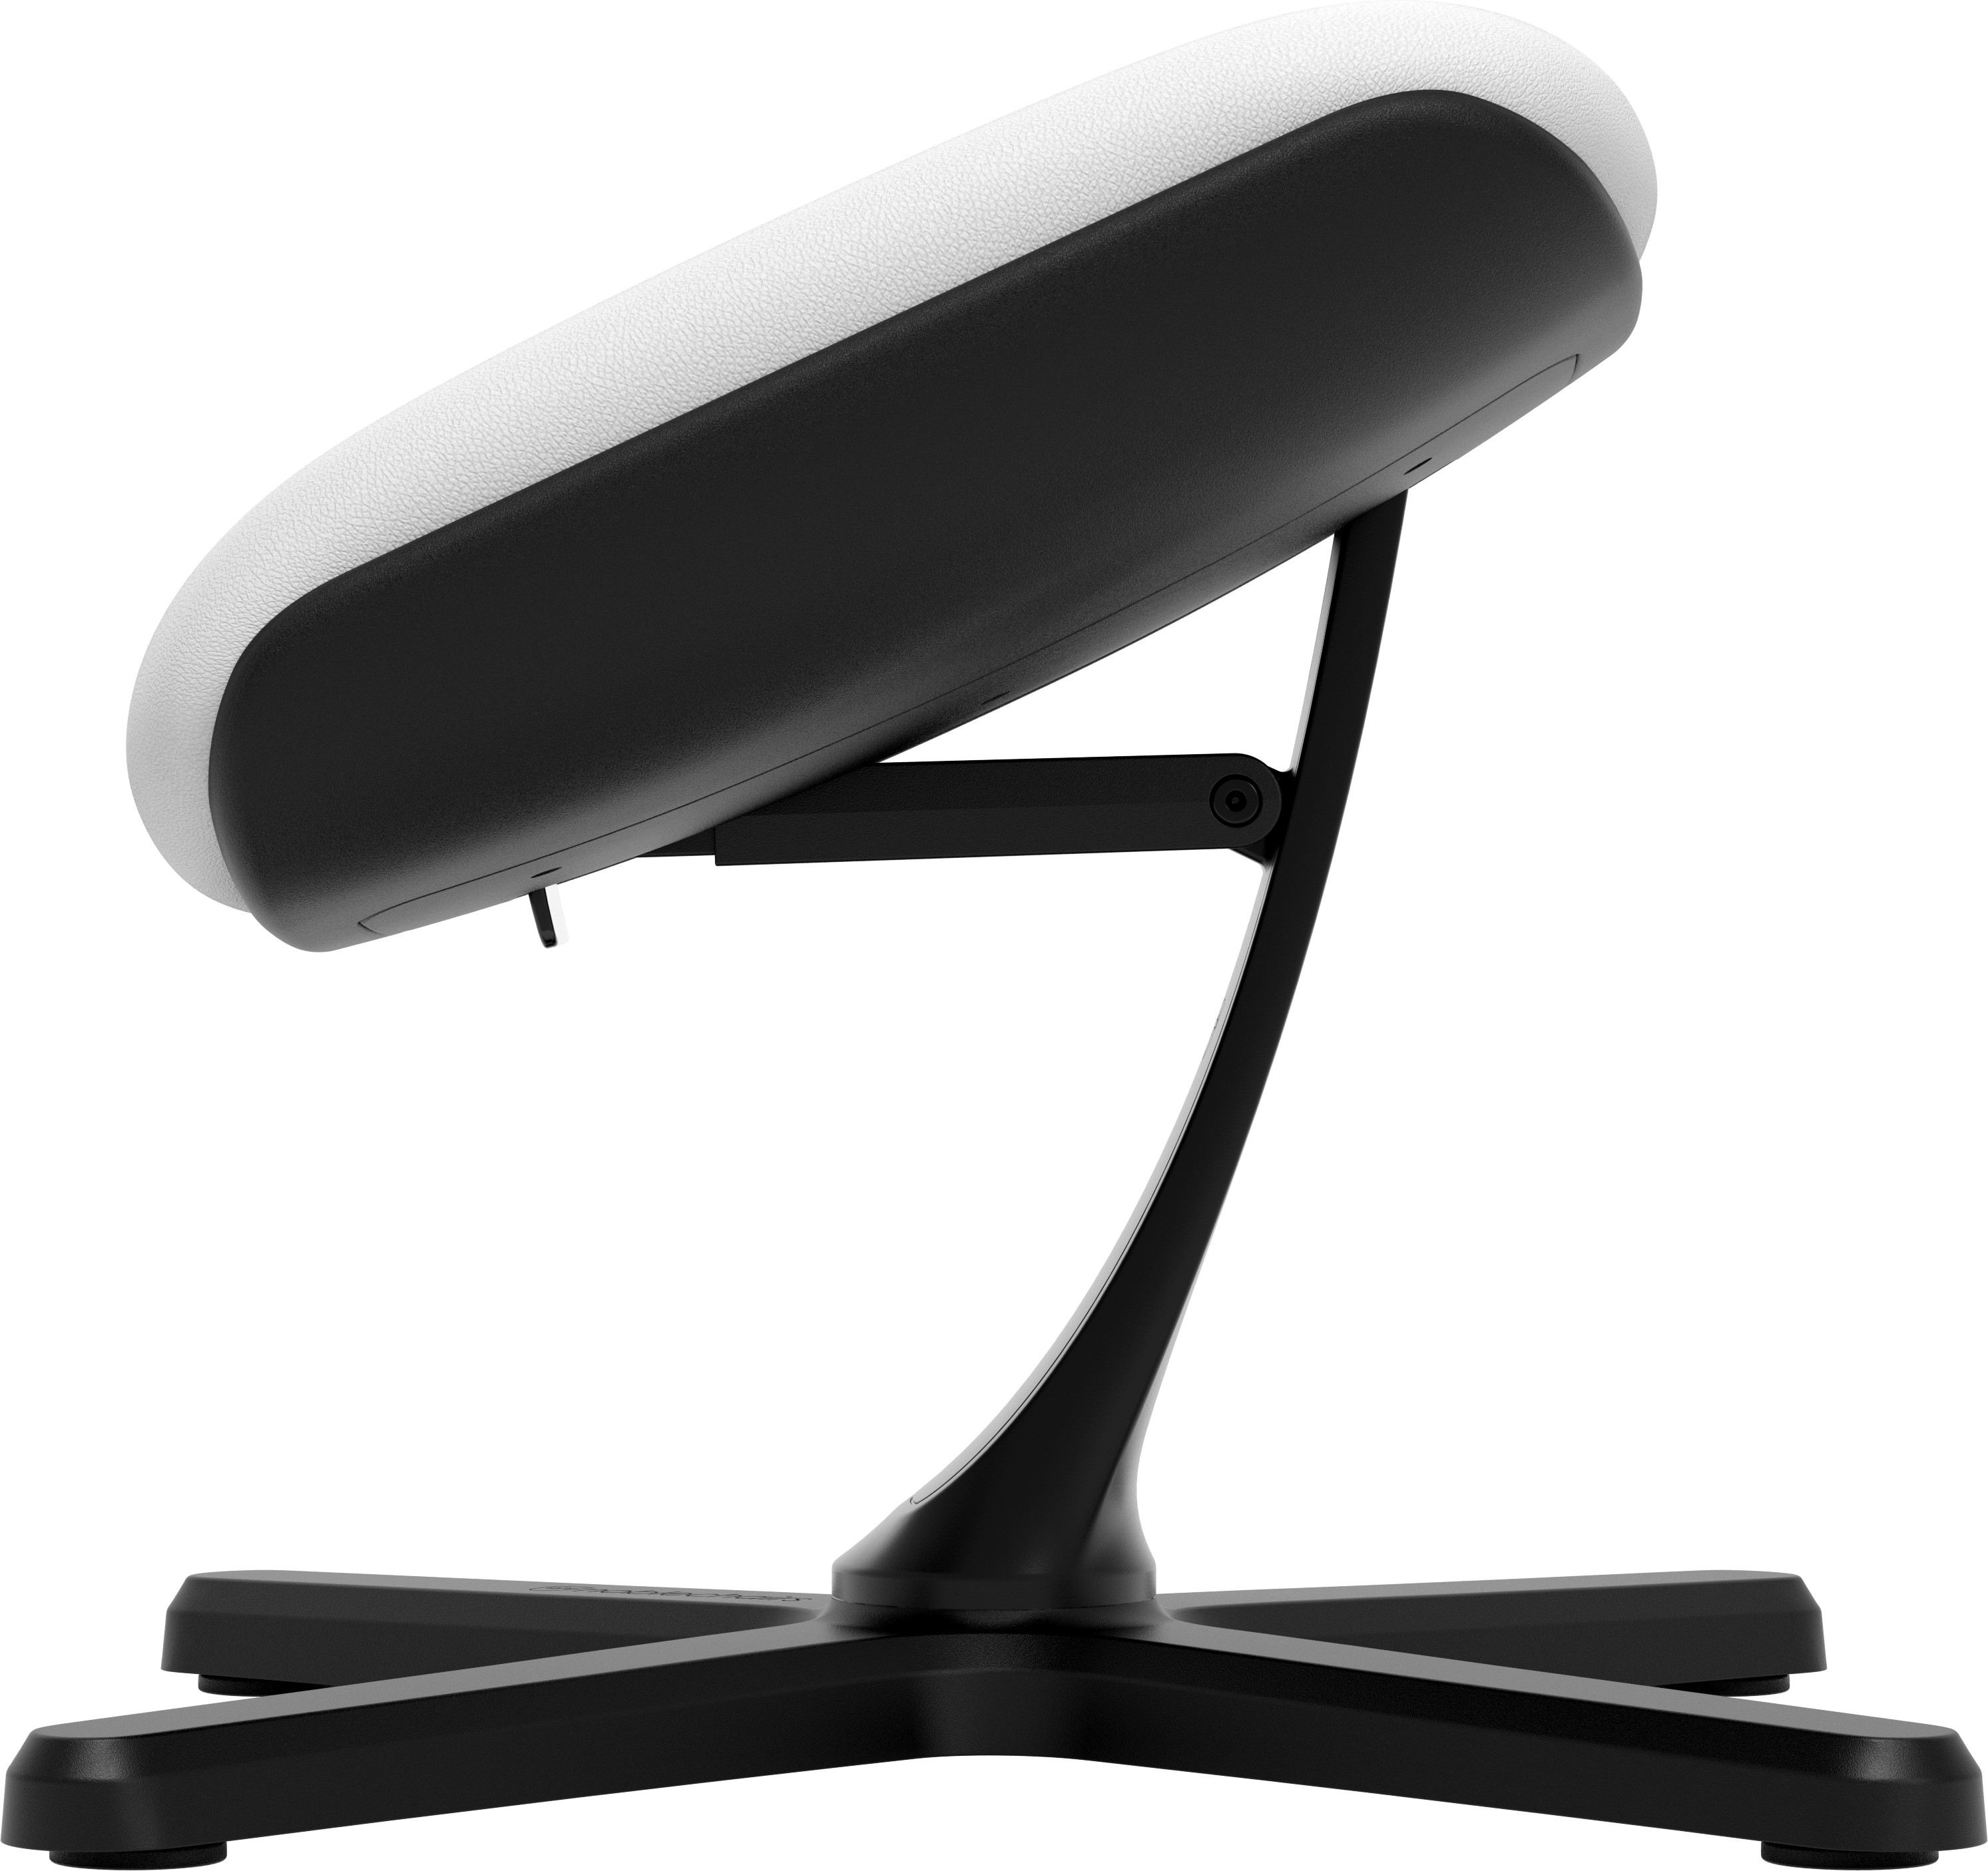 noblechairs Footrest 2 - White Edition adjustable features